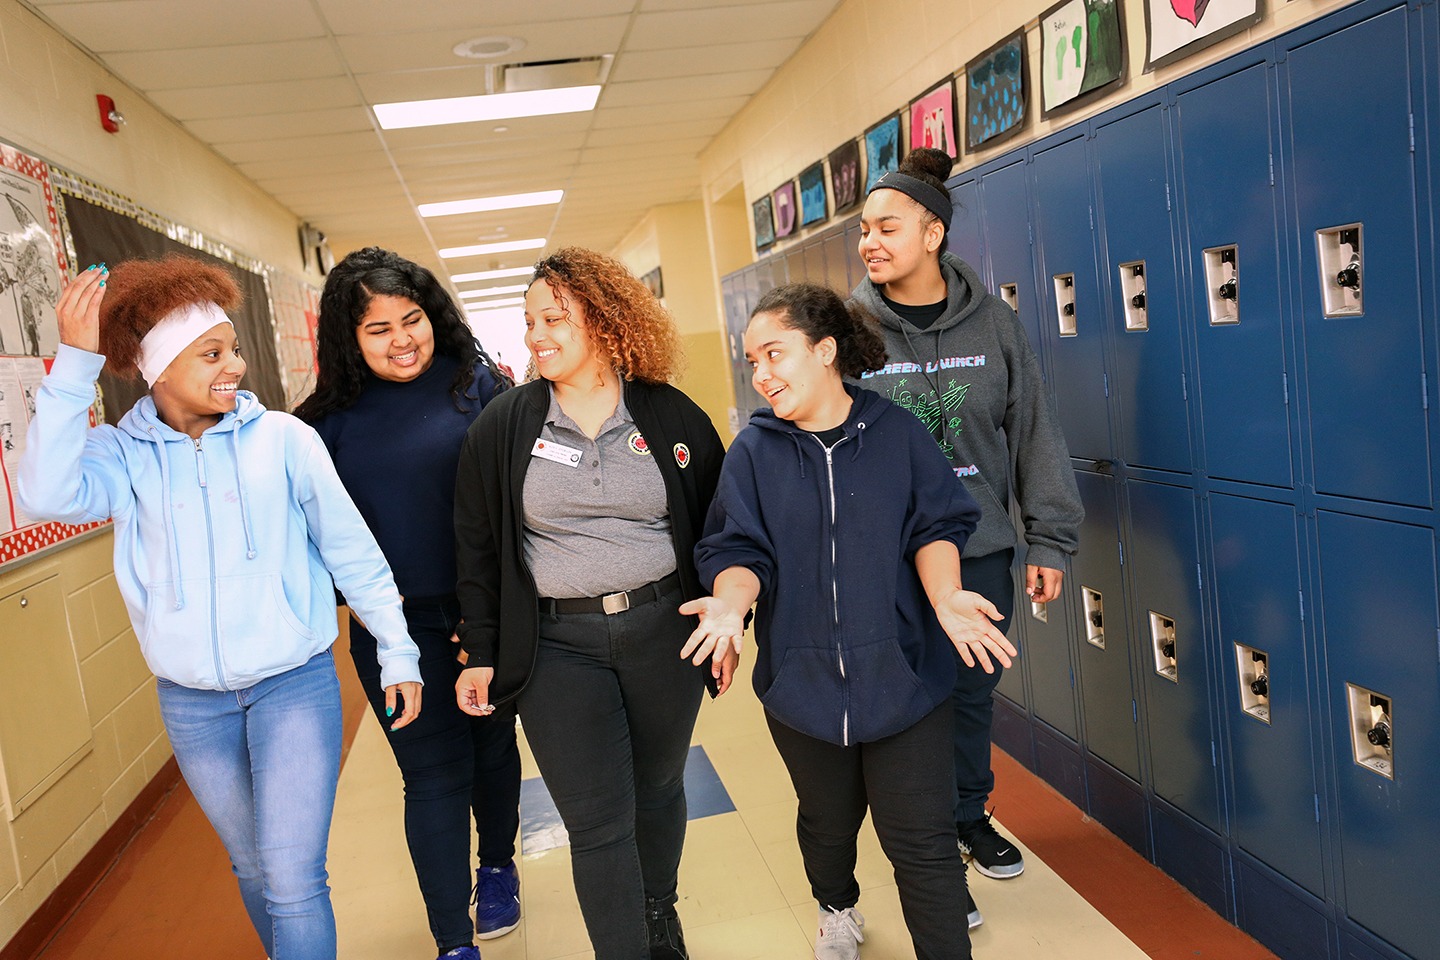 a city year americorps member walking with students in a hallway next to lockers